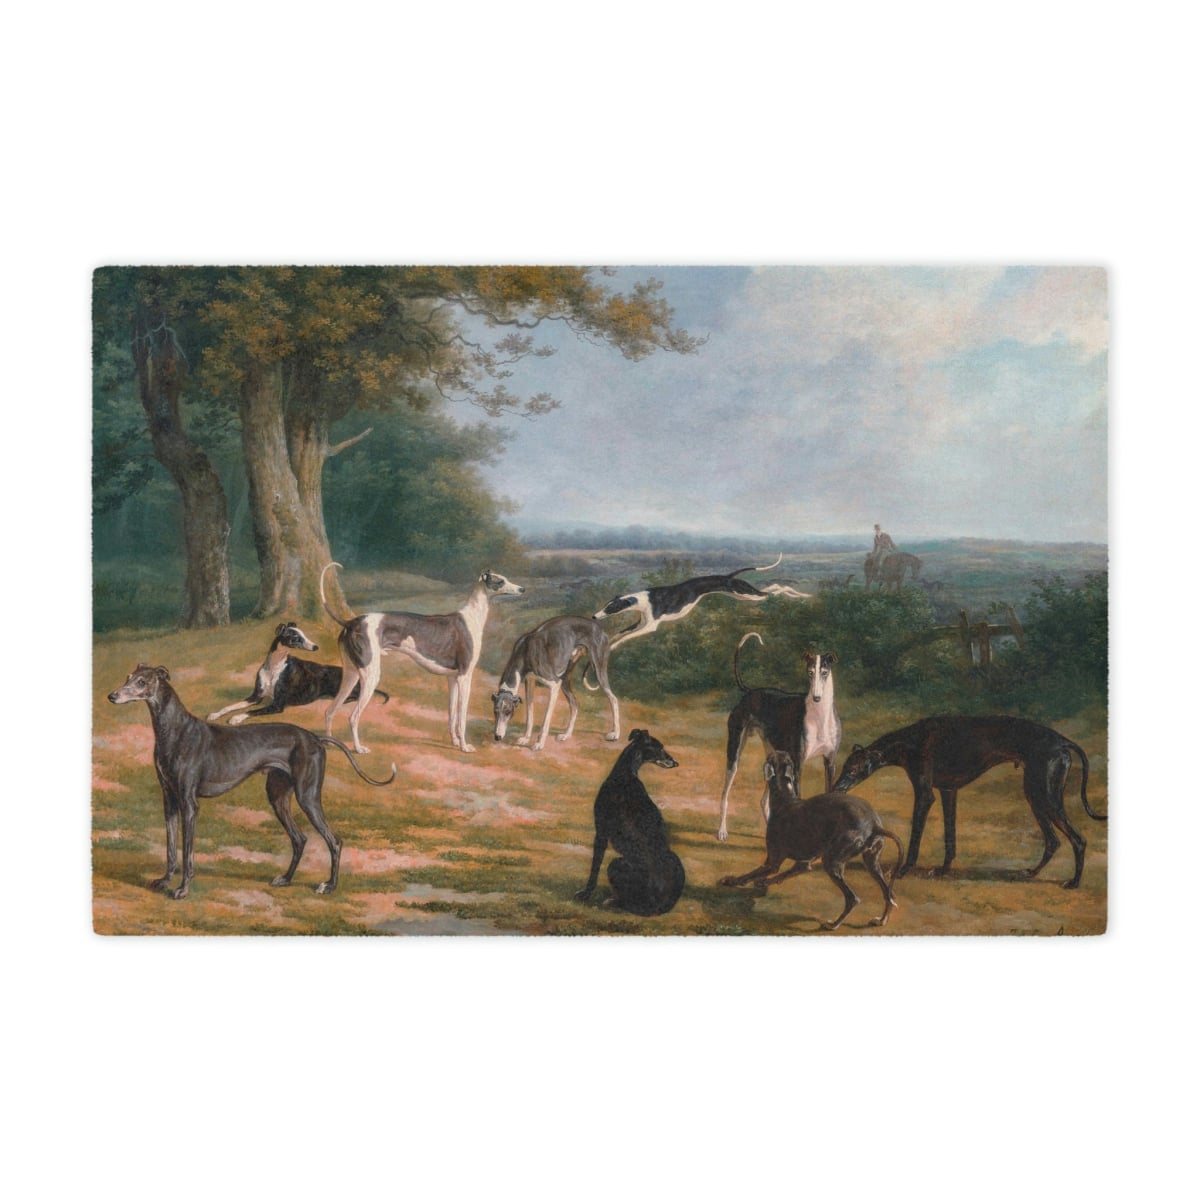 Nine Greyhounds in a Landscape Painting Blanket - Classic Art Throw